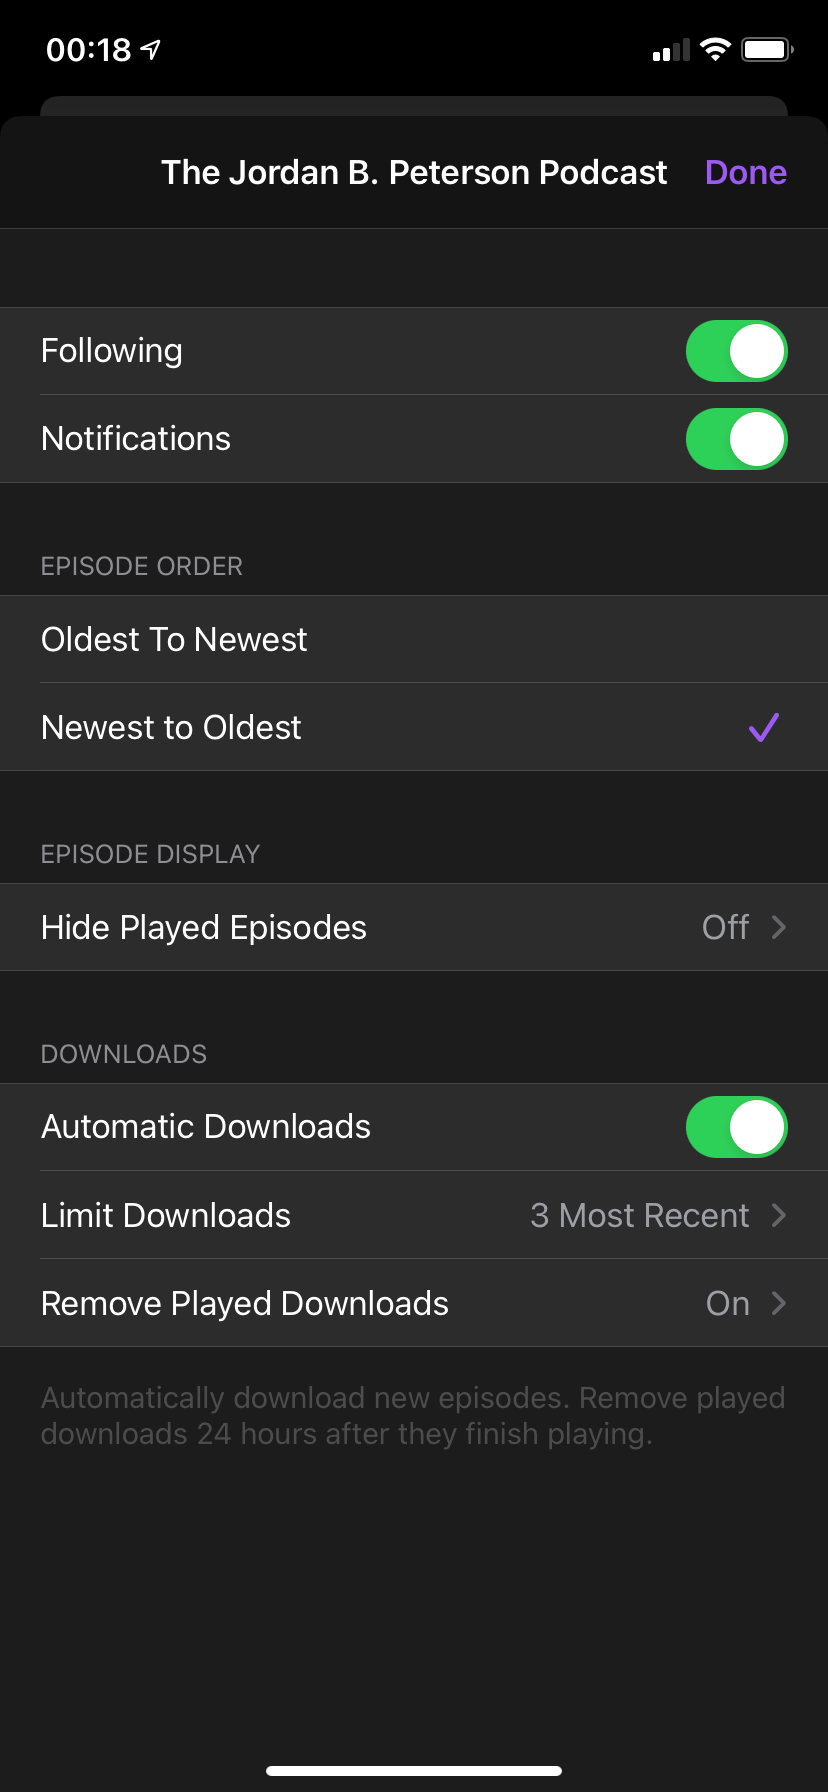 How to Manage Downloads in the iPhone Podcasts App